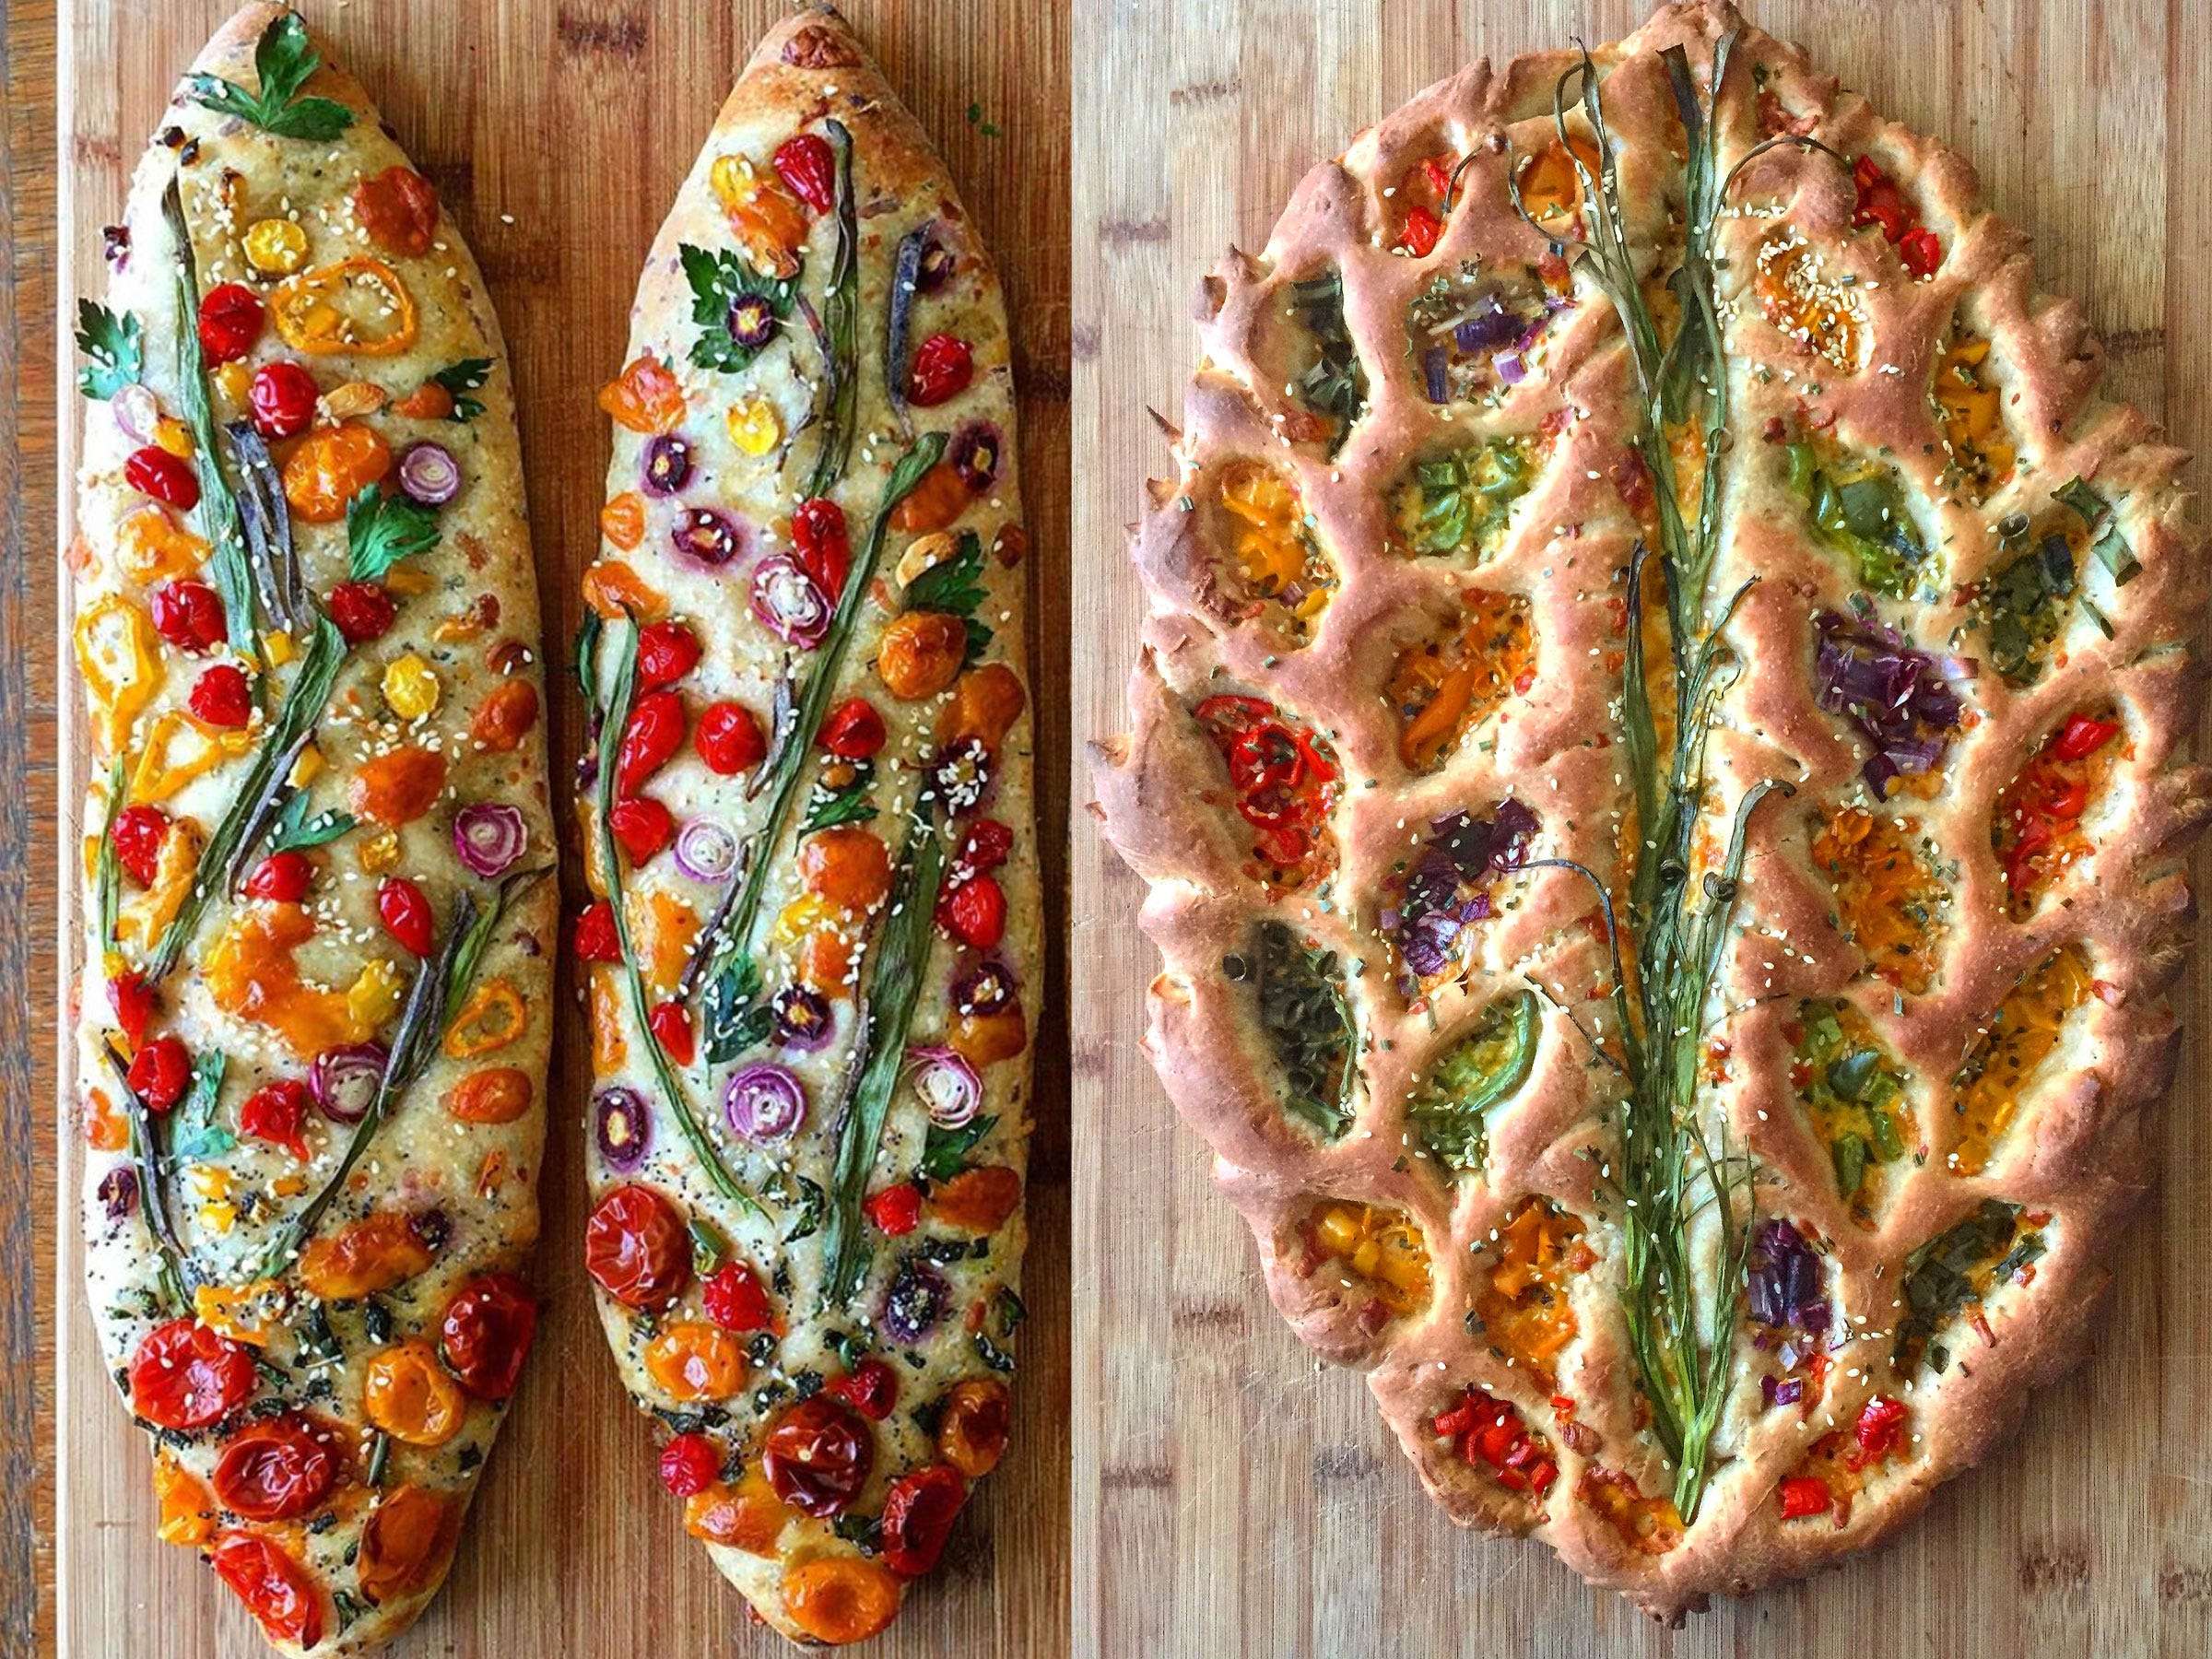 A Self Taught Baker Turns Her Bread Into Beautiful Works Of Art